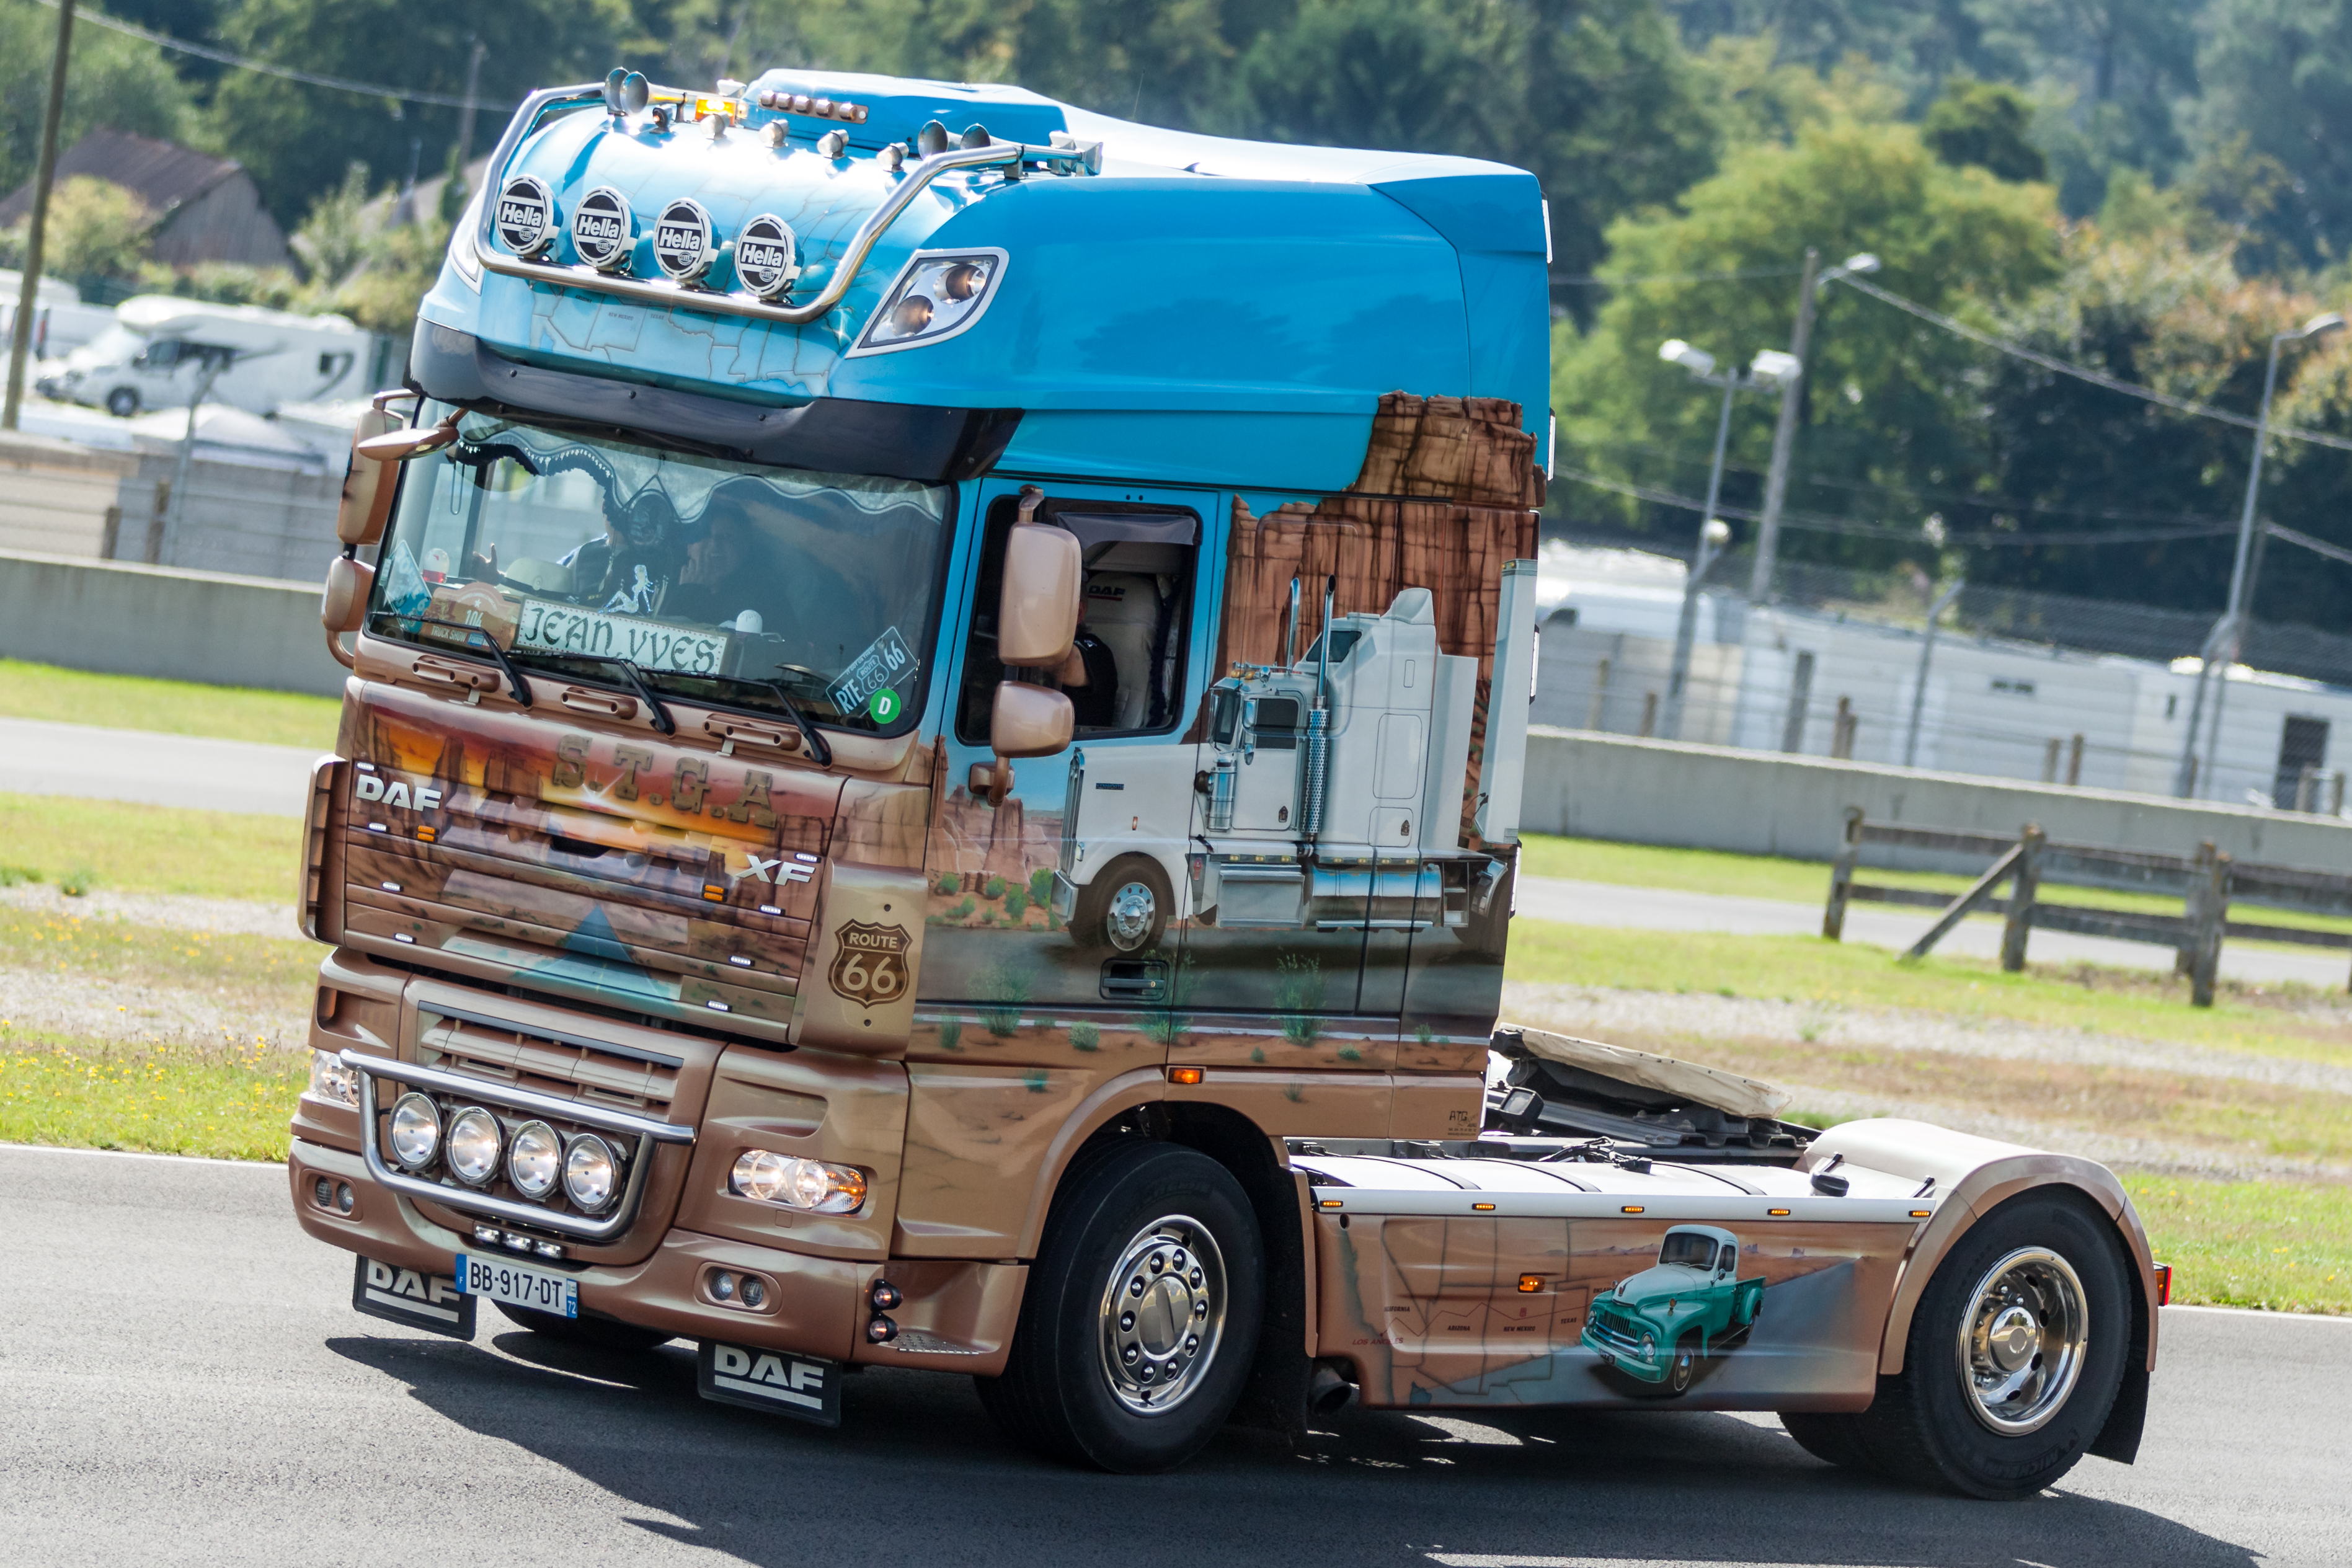 DAF Truck Pictures - Free High Resolution Photo Galleries To Download